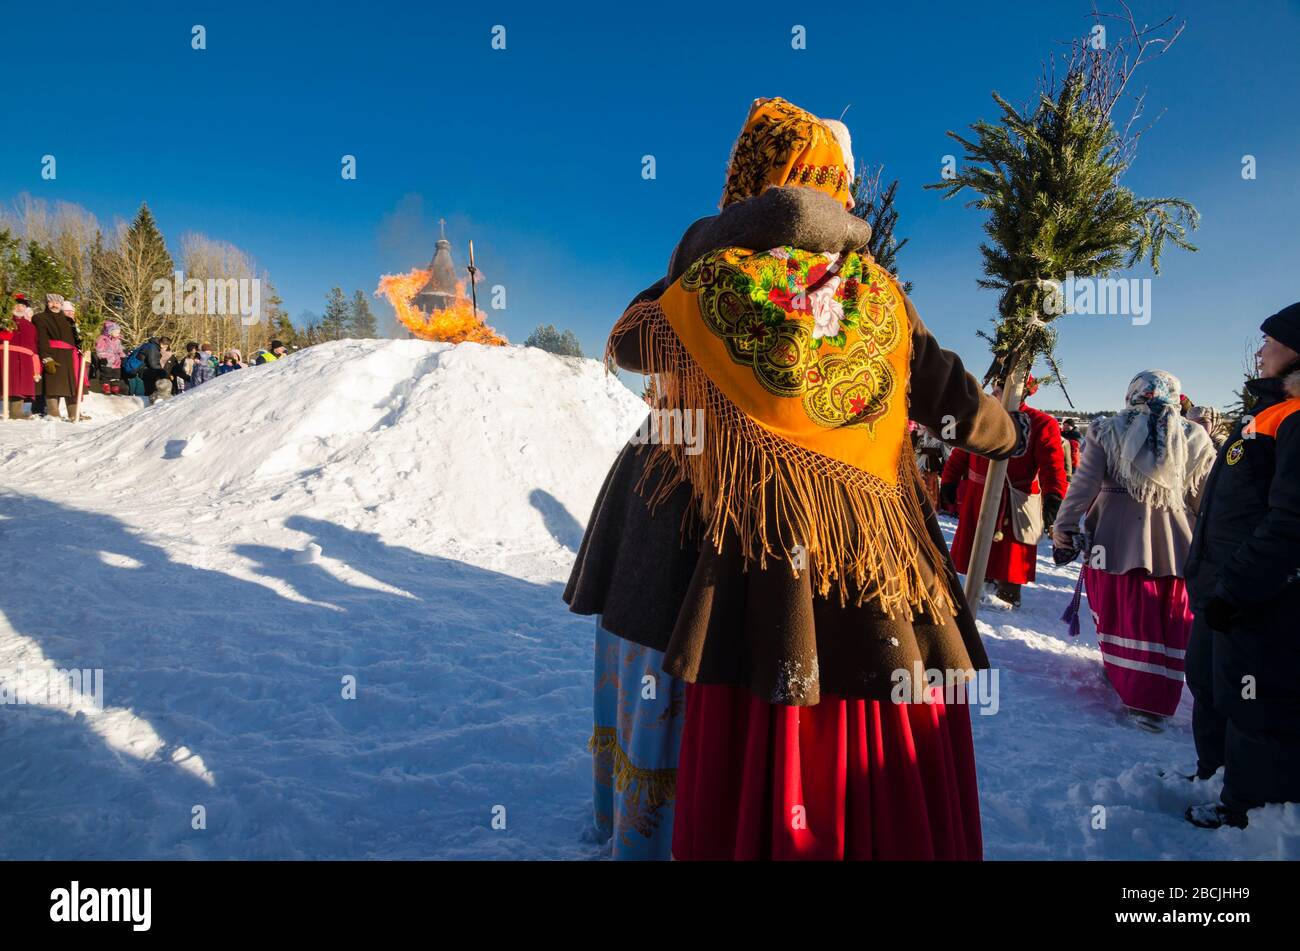 March 2020 - Malye Korely. Burning a scarecrow on Shrovetide. Russia, Arkhangelsk region Stock Photo